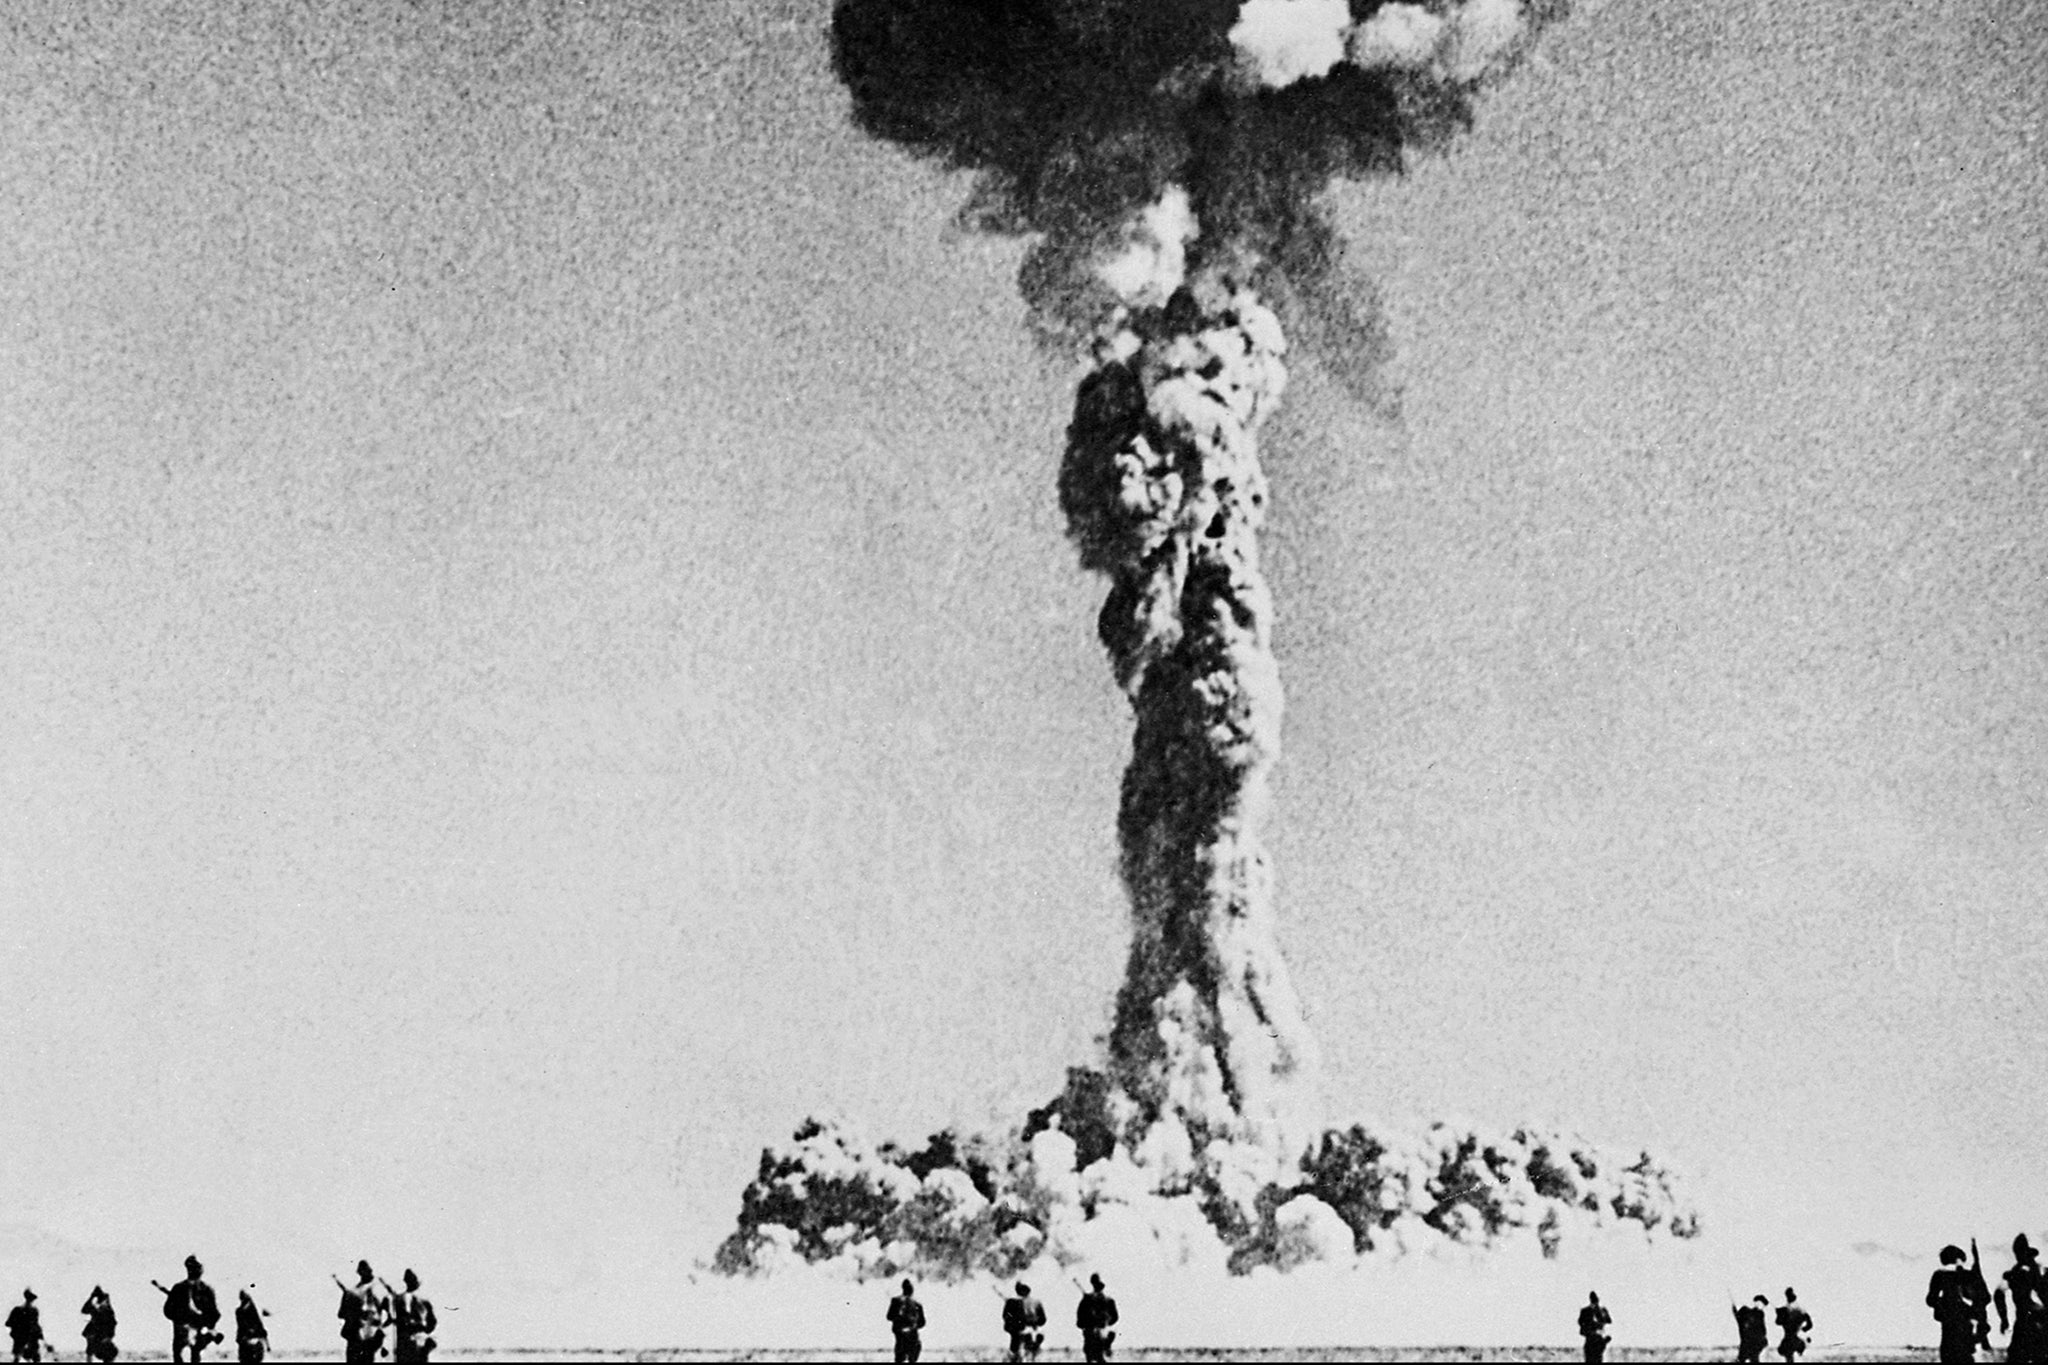 More than 22,000 British and Commonwealth servicemen were sent to the South Pacific in the 1950s and 1960s as guinea pigs to watch and experience the aftermath of nuclear weapons testing